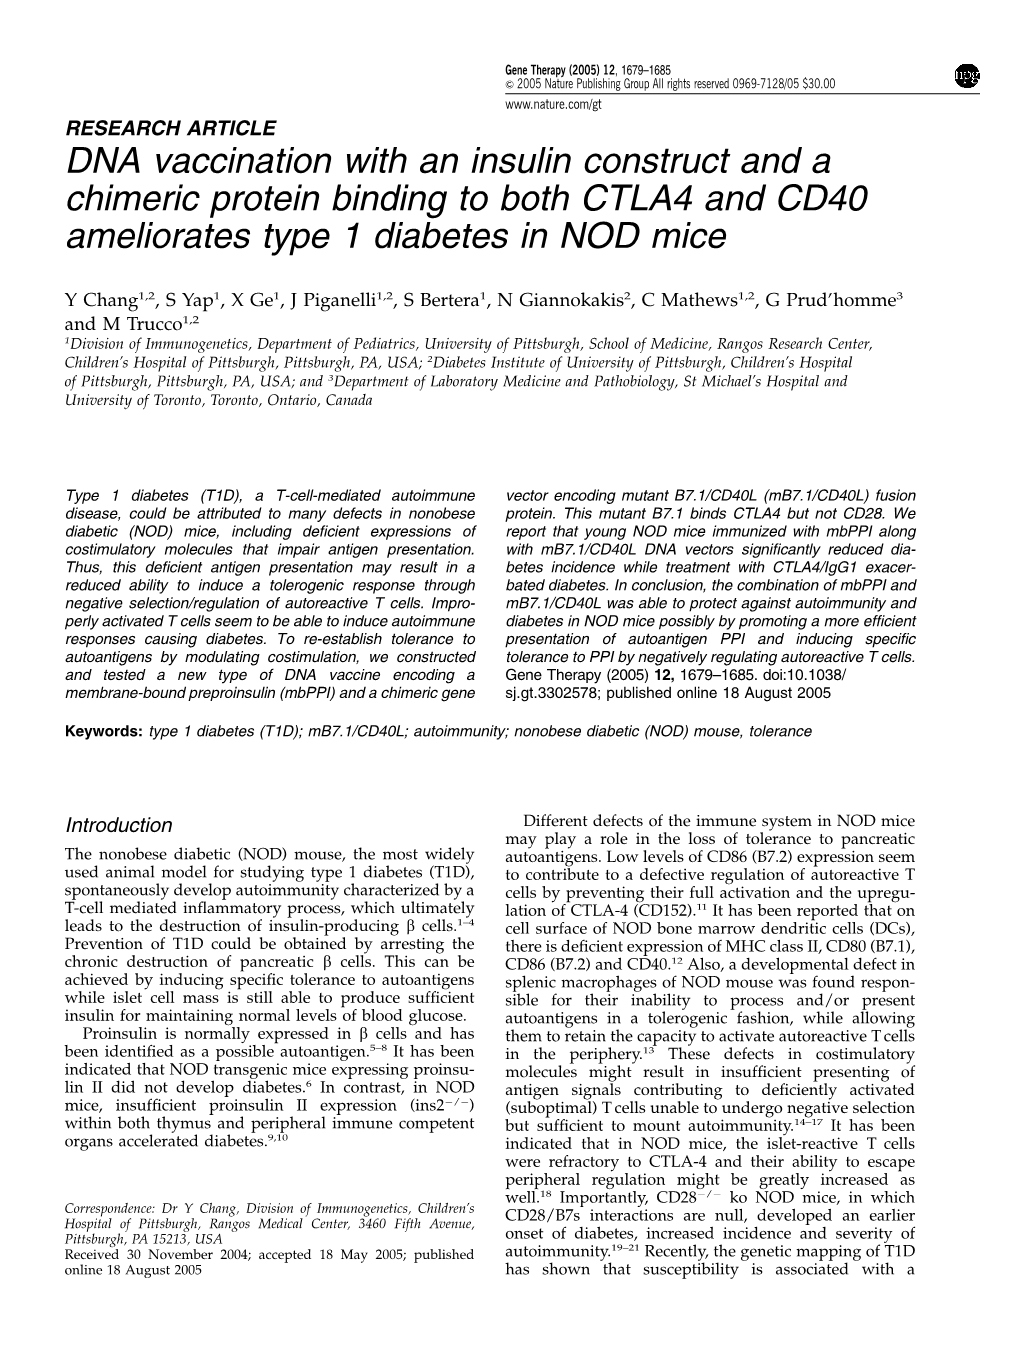 DNA Vaccination with an Insulin Construct and a Chimeric Protein Binding to Both CTLA4 and CD40 Ameliorates Type 1 Diabetes in NOD Mice